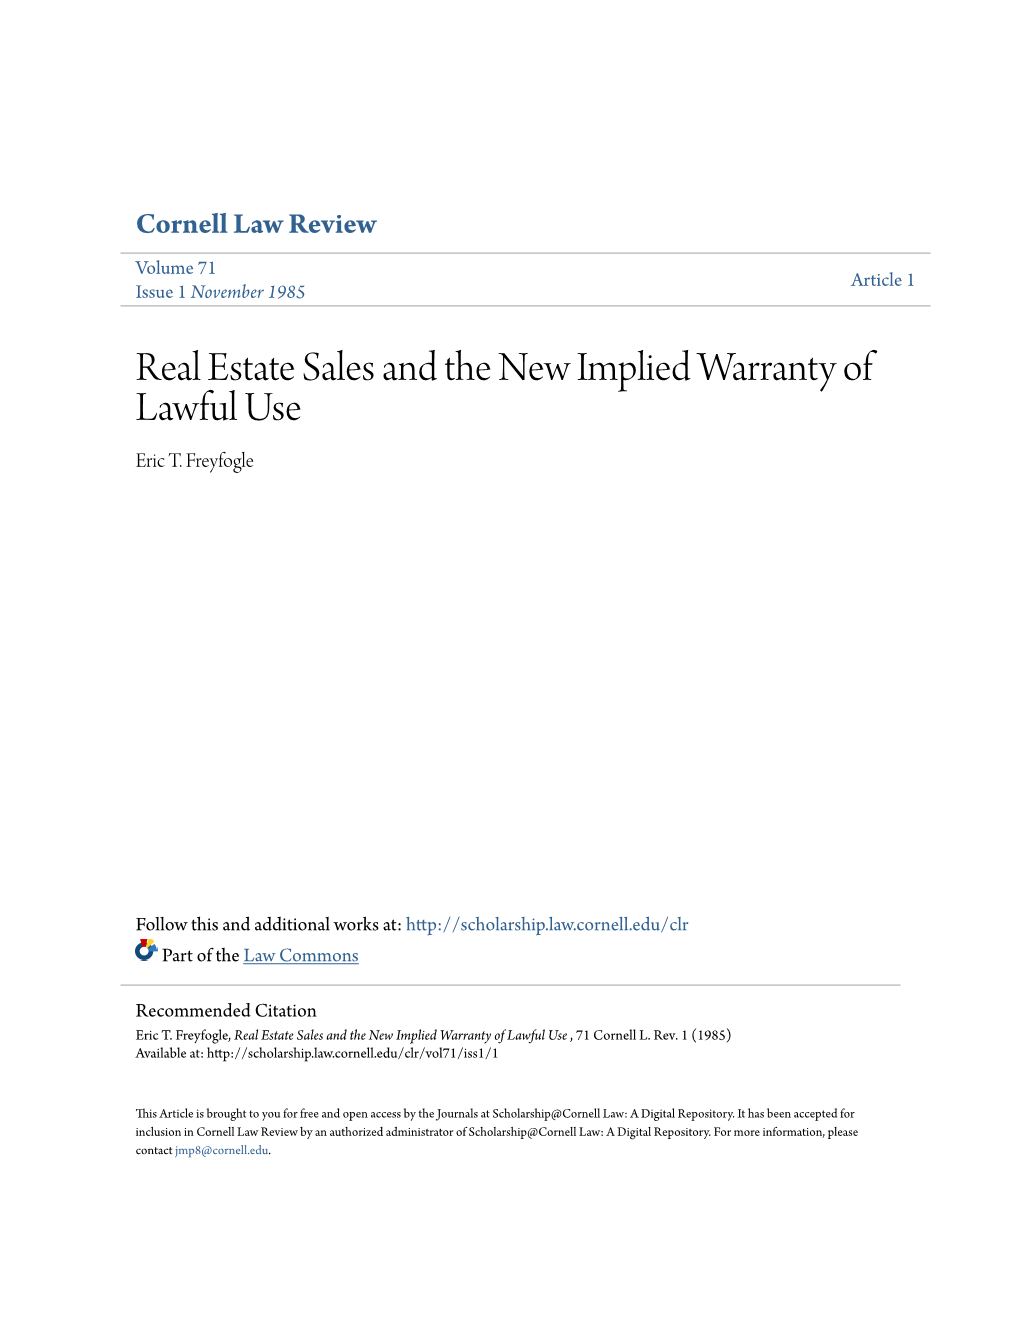 Real Estate Sales and the New Implied Warranty of Lawful Use Eric T